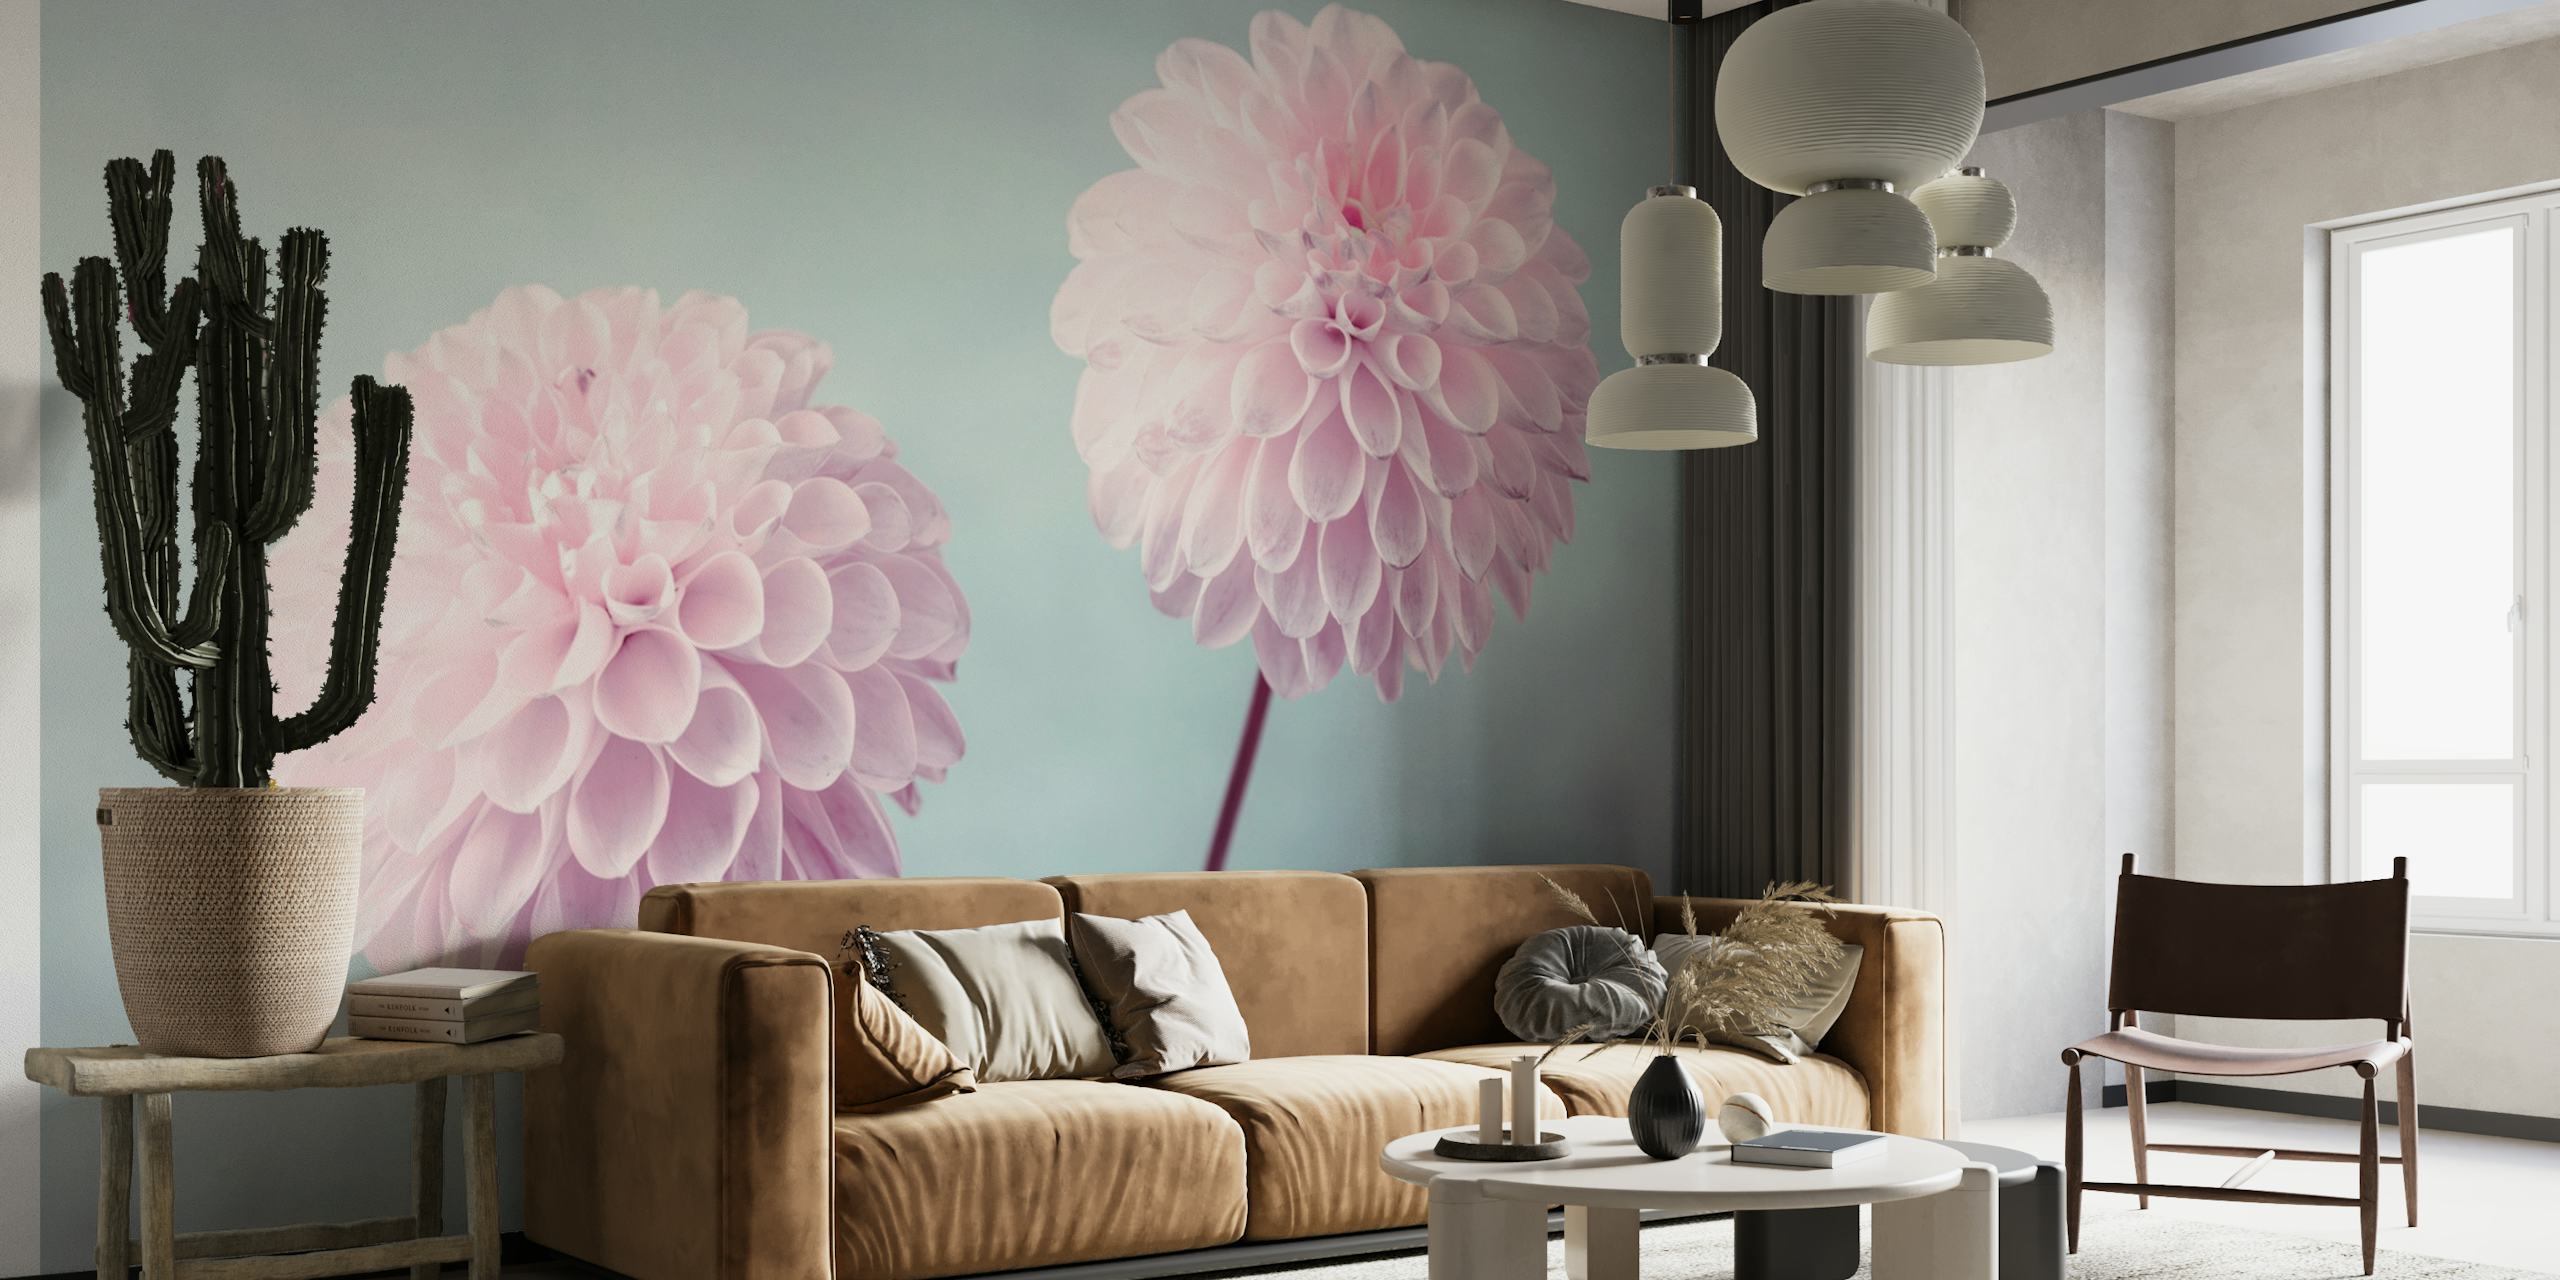 A pair of pink flowers against a teal background in 'Delicate Splendor' wall mural